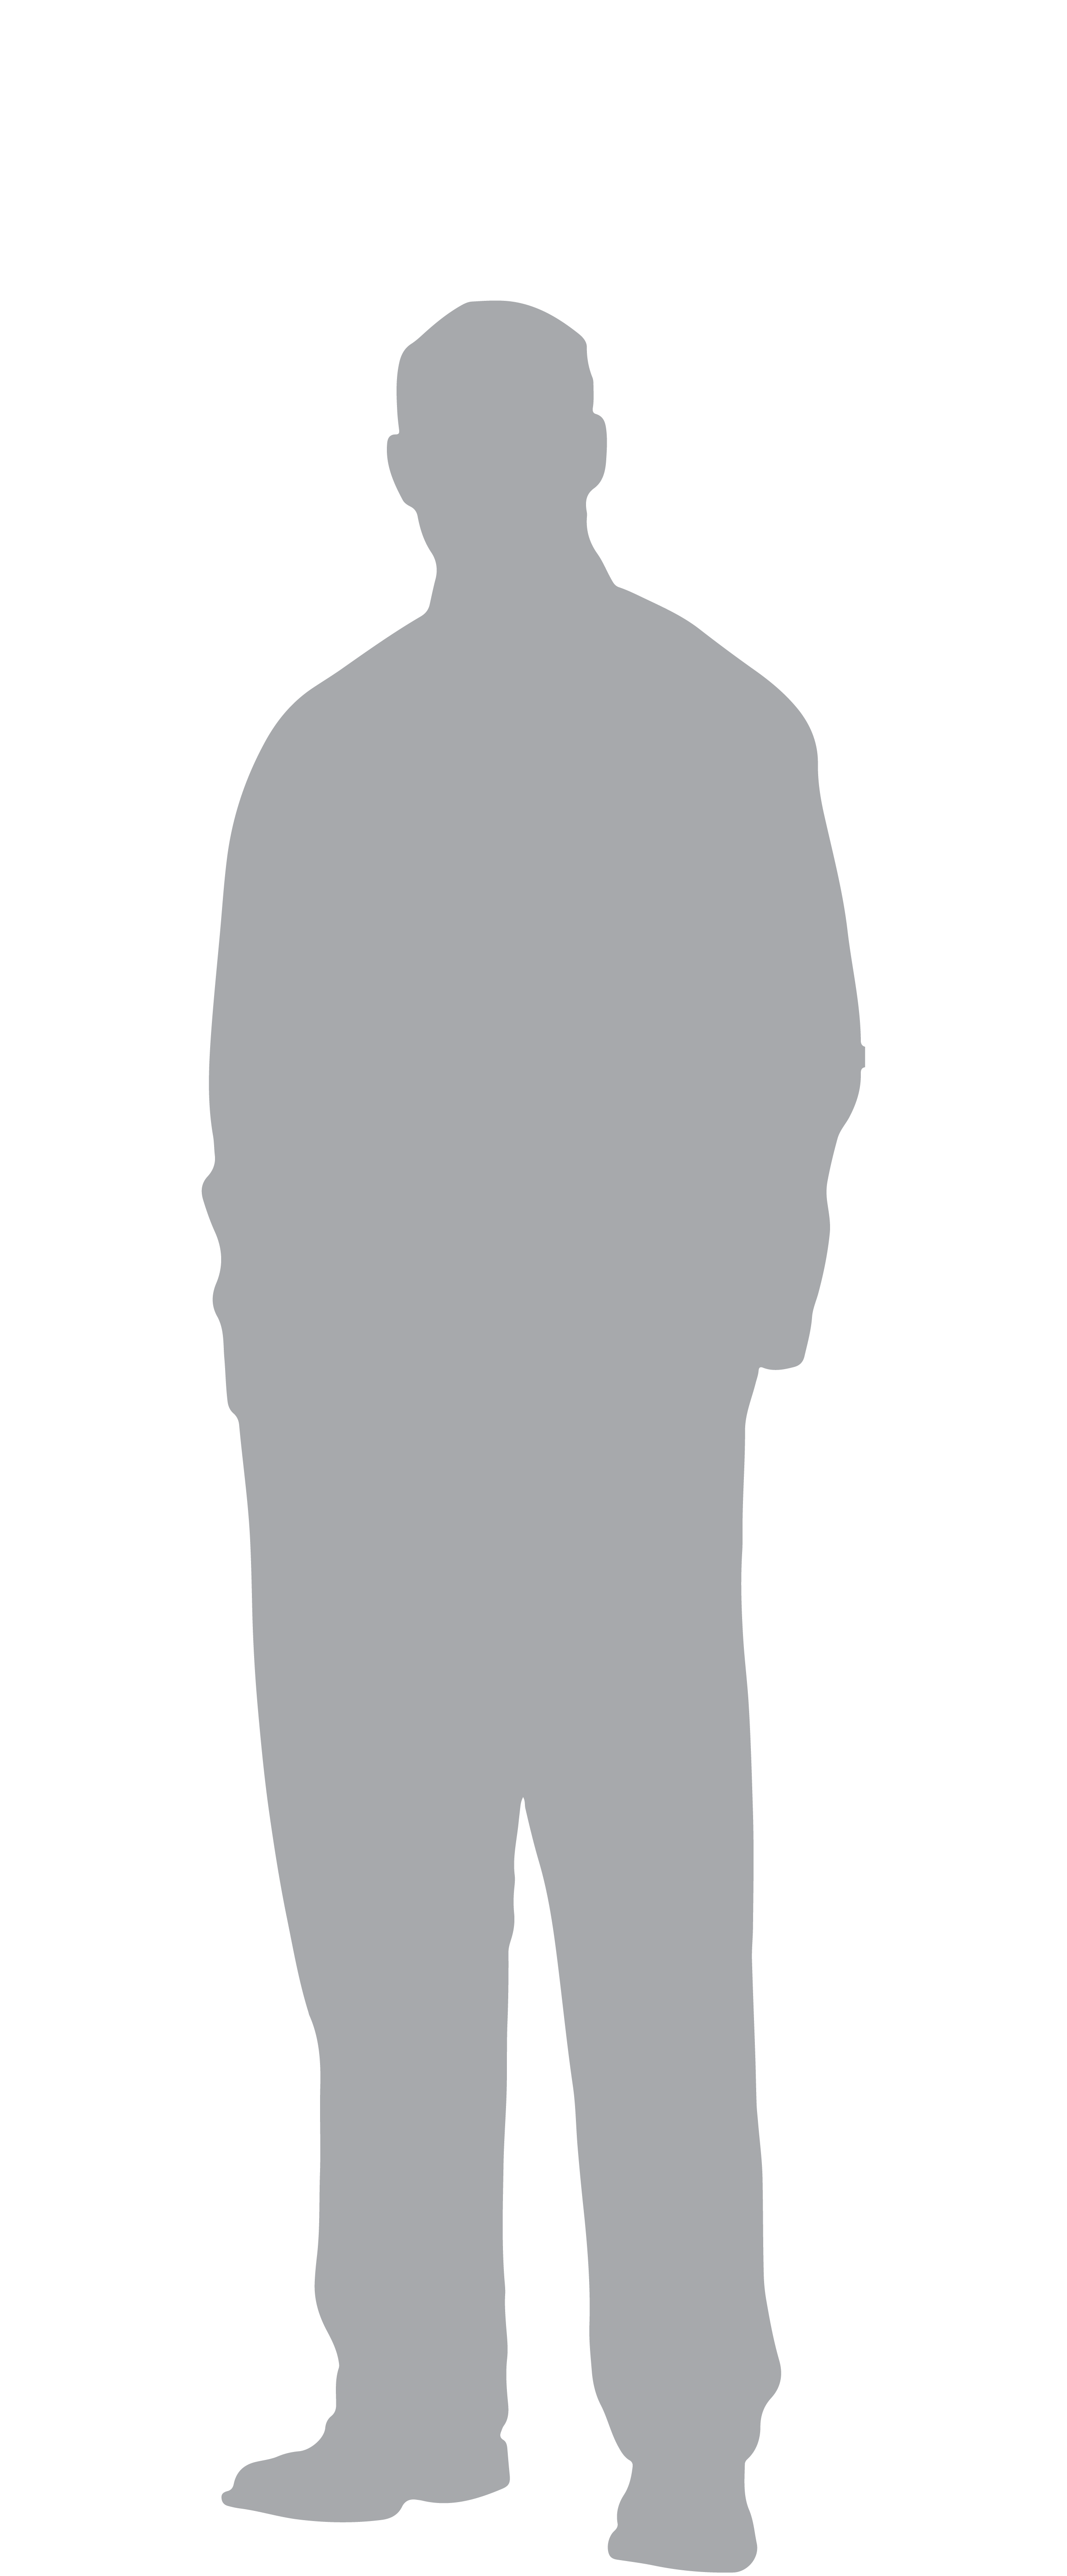 Silhouette-figure.png